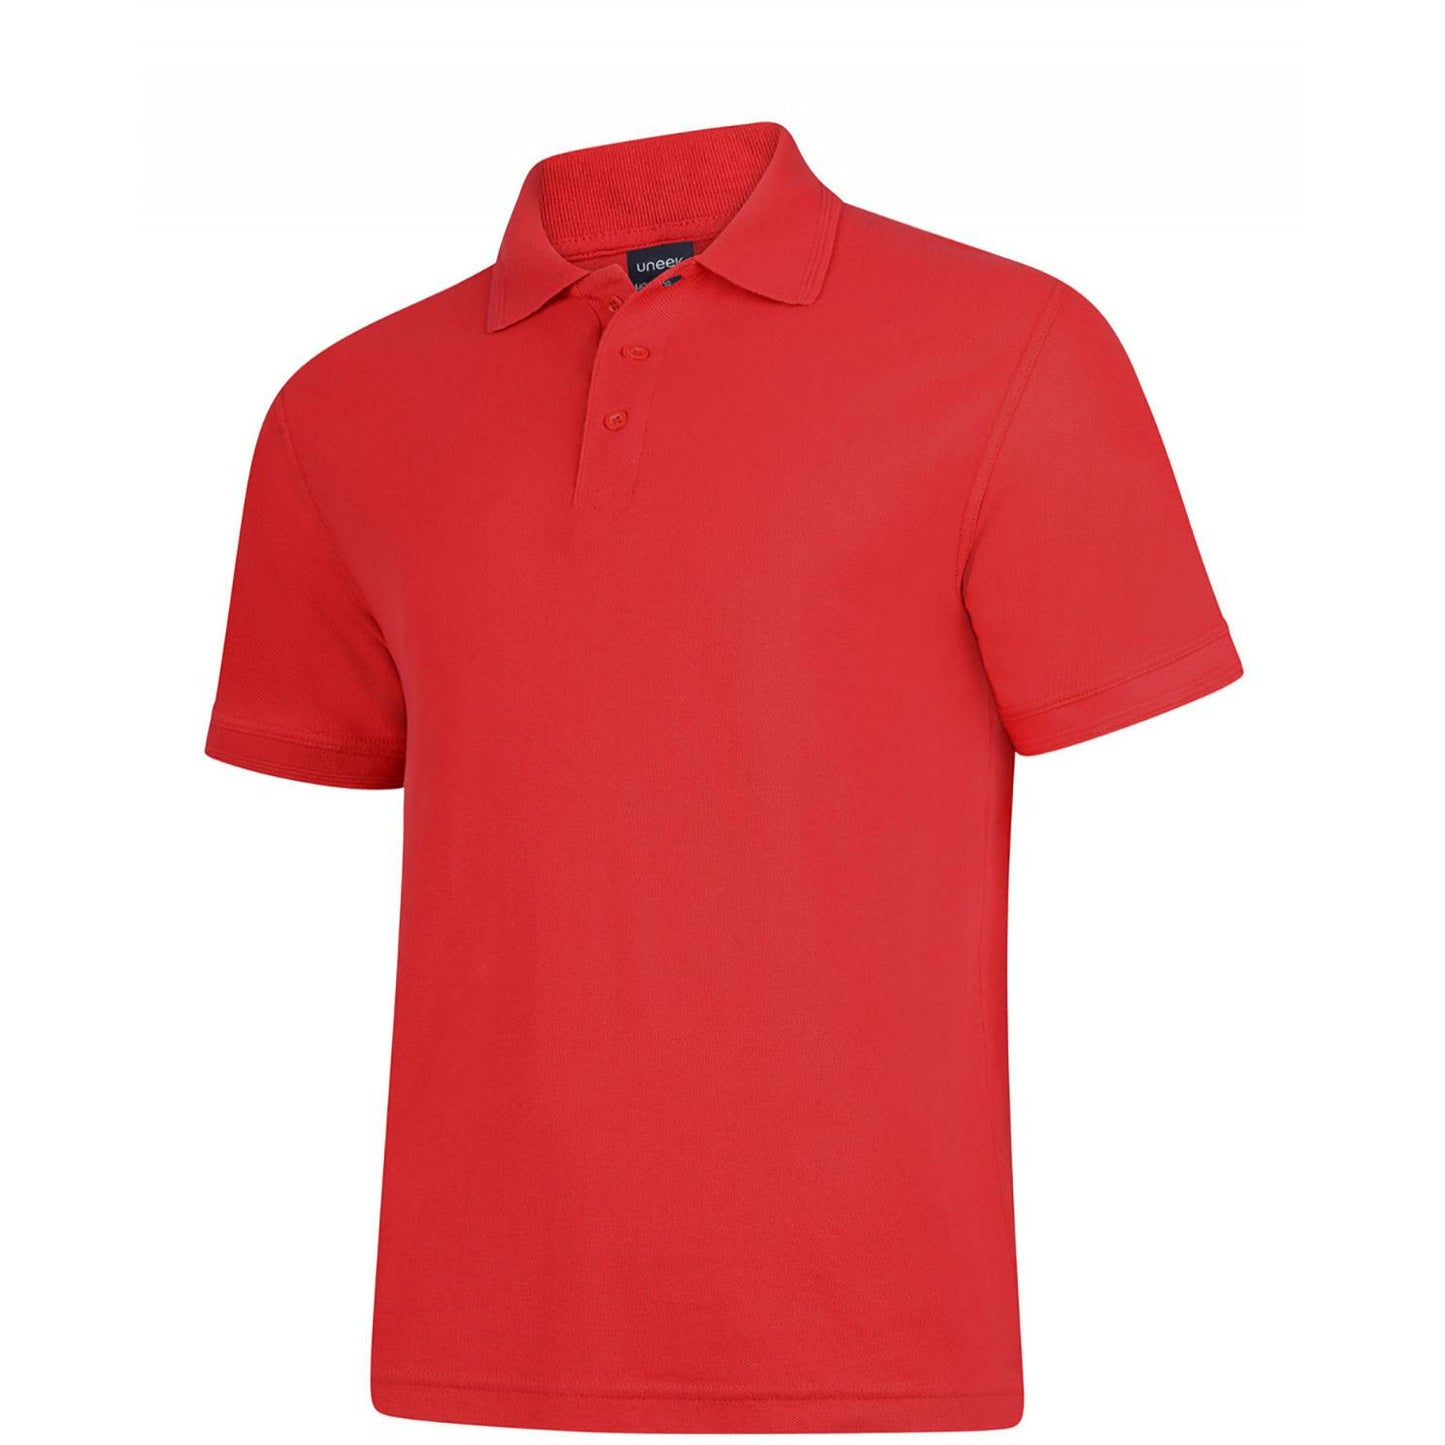 Deluxe Polo Shirt (2XL - 4XL) - Red